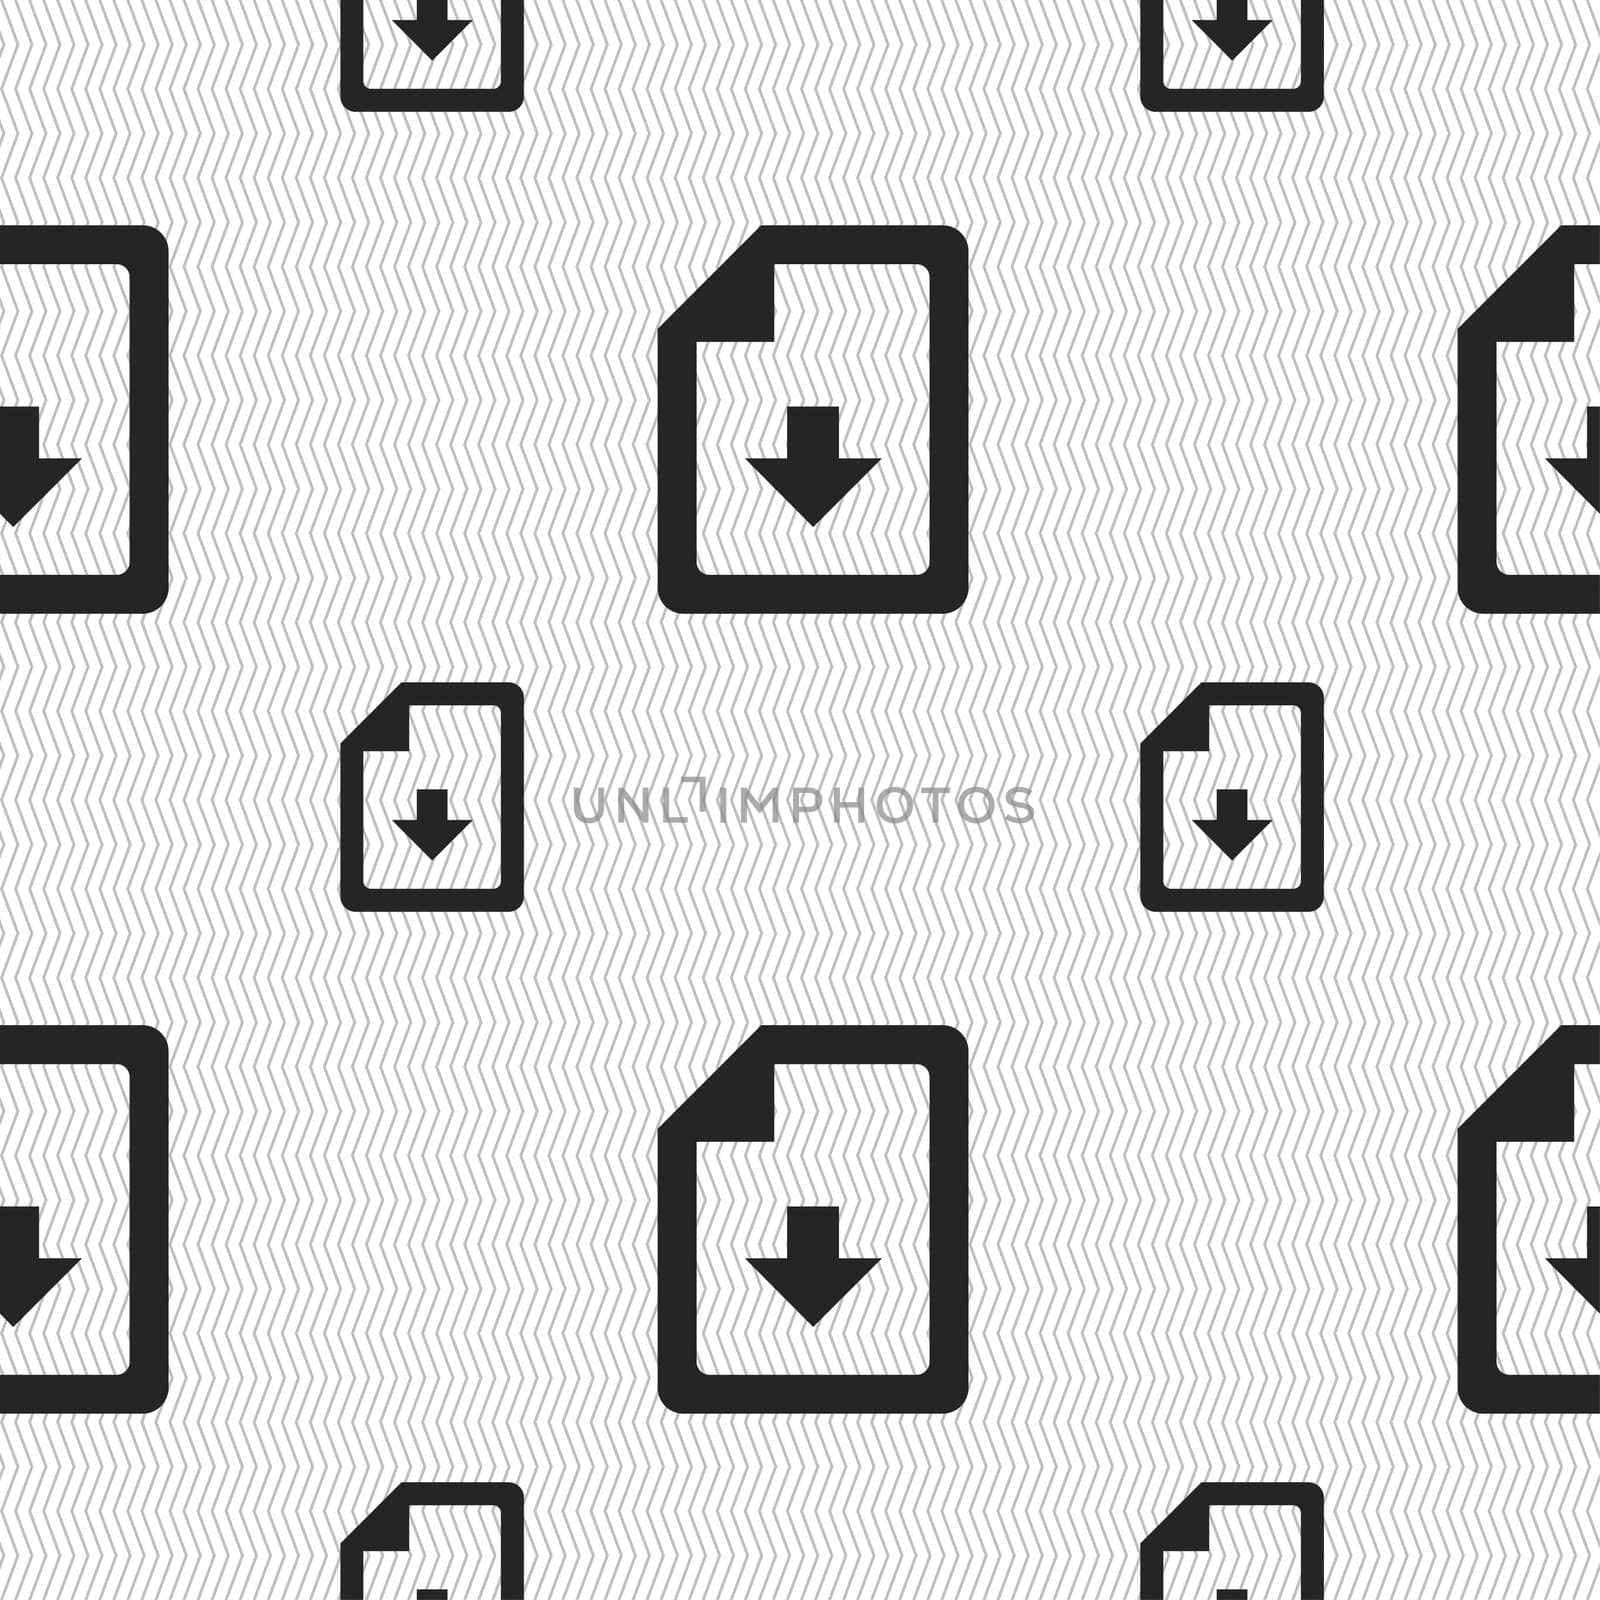 import, download file icon sign. Seamless pattern with geometric texture. illustration